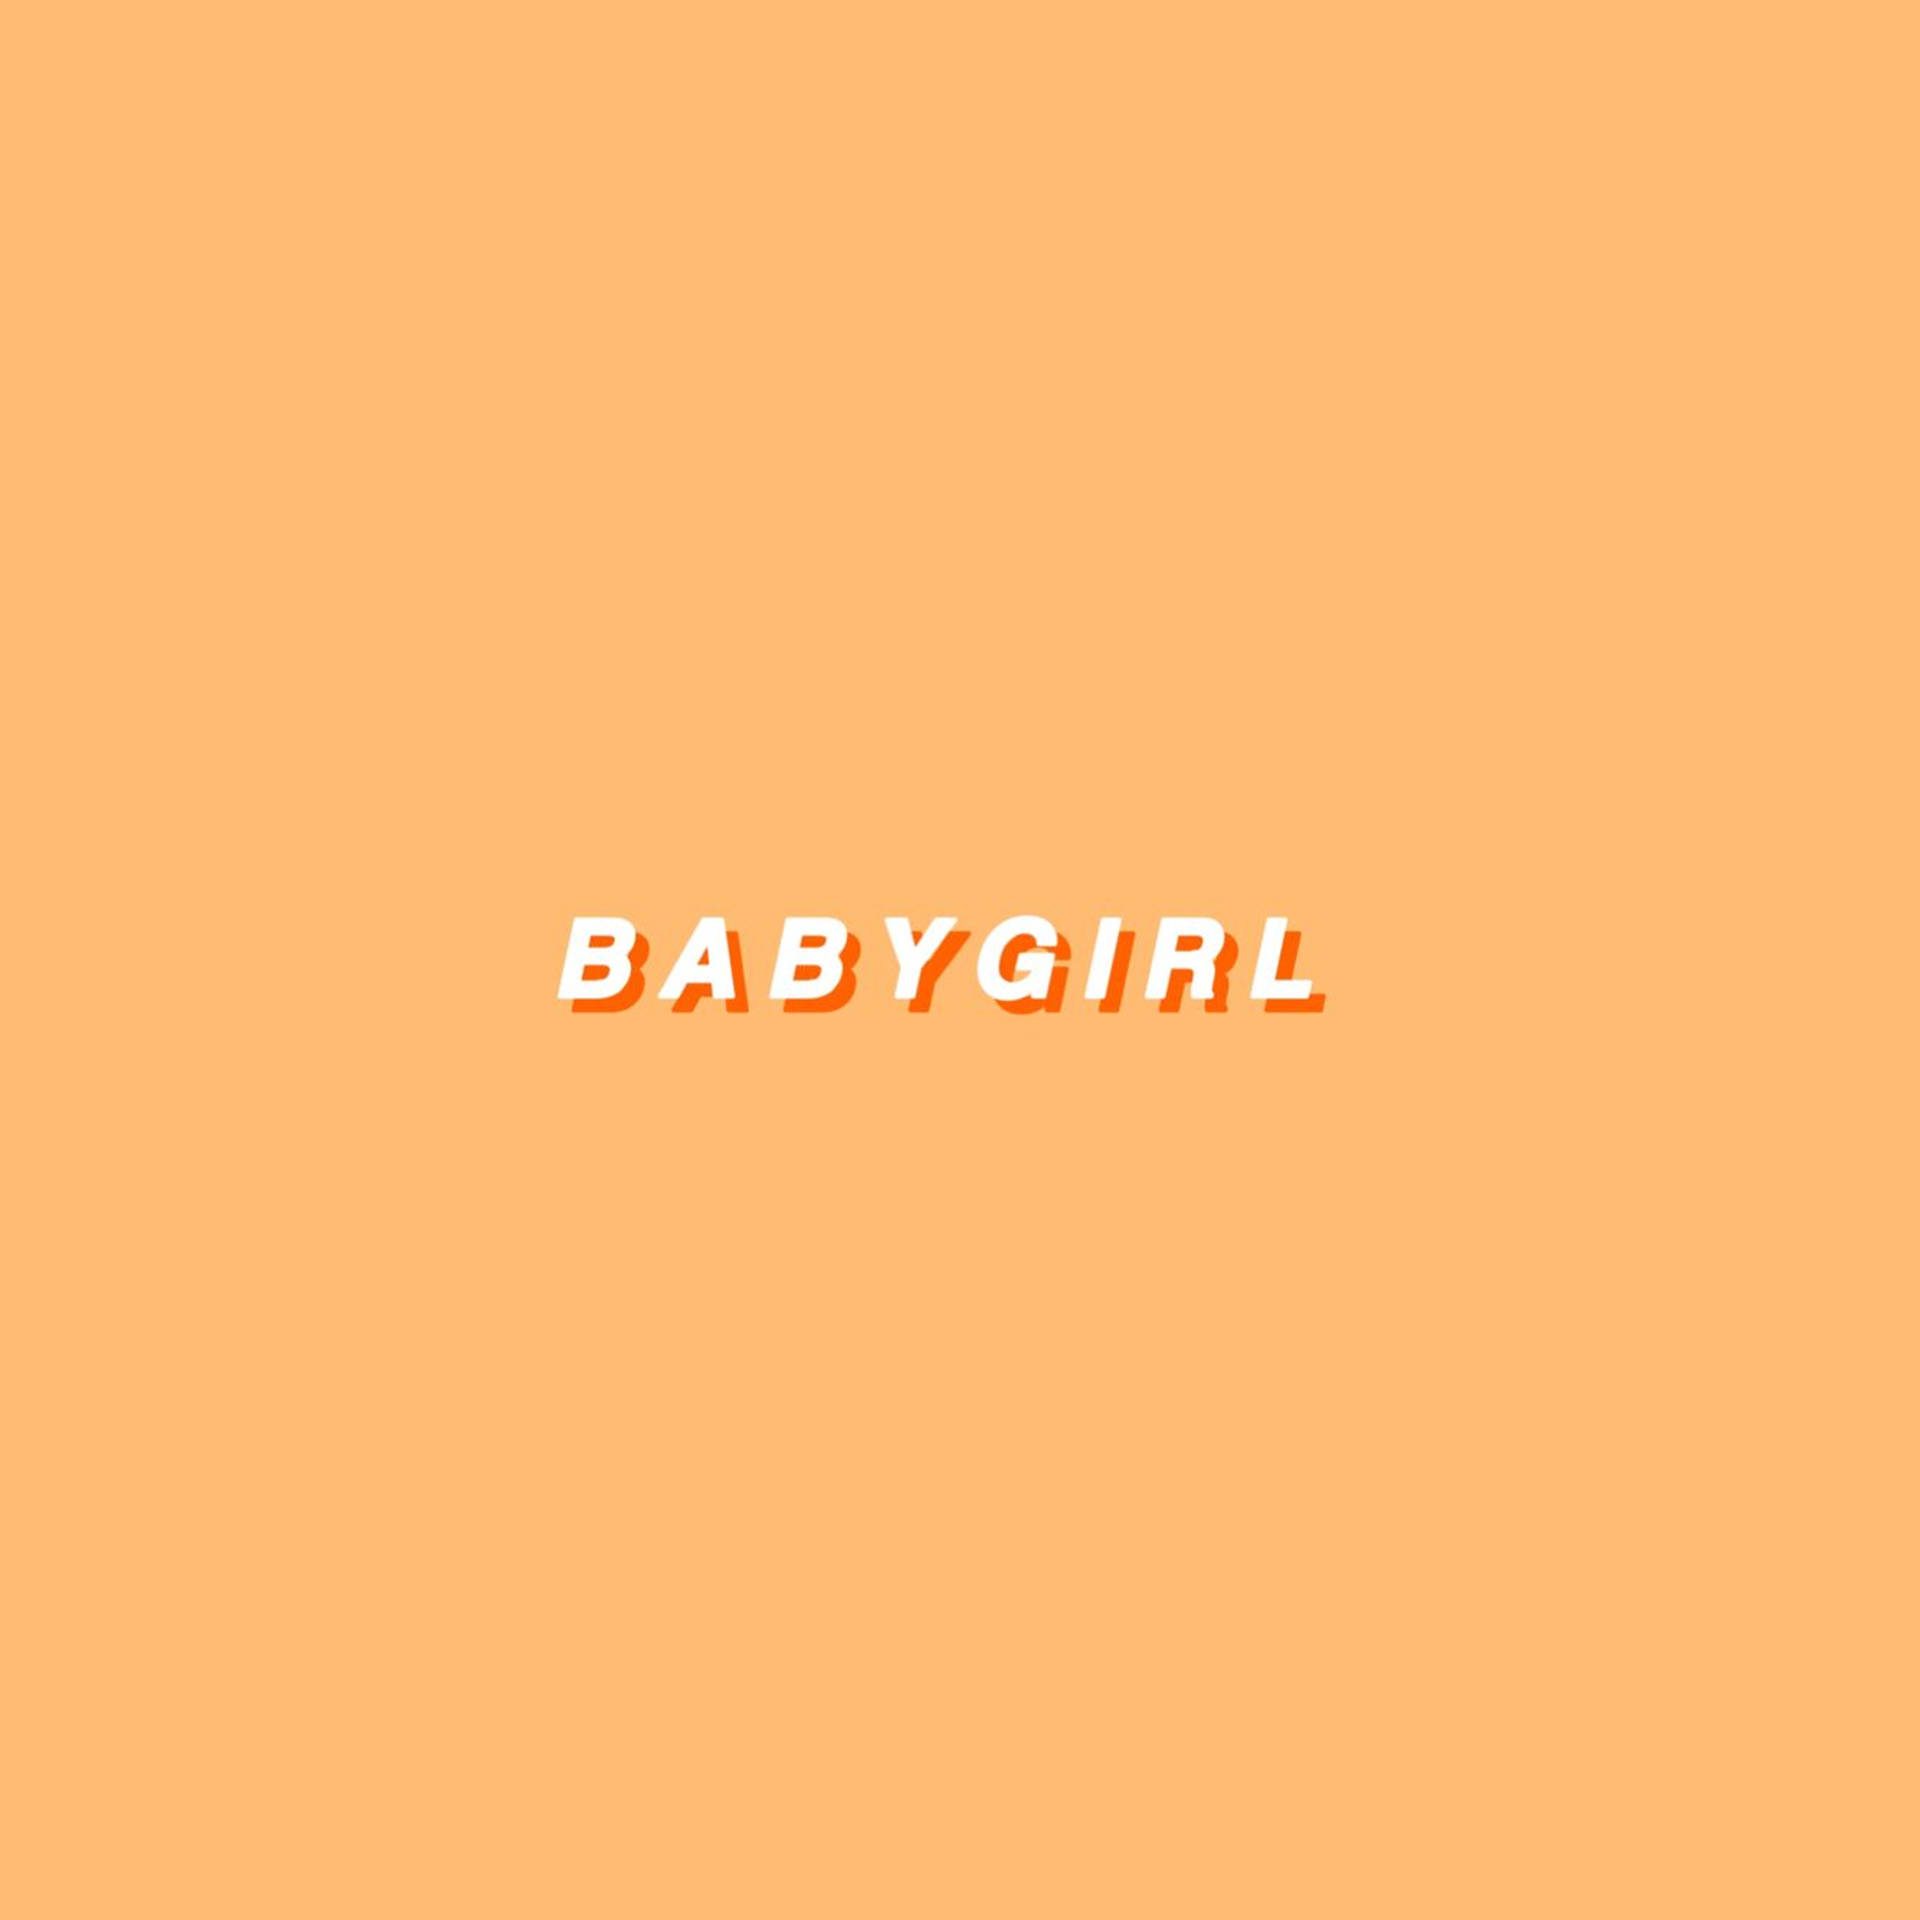 Download Free 100 + babygirl aesthetic Wallpapers